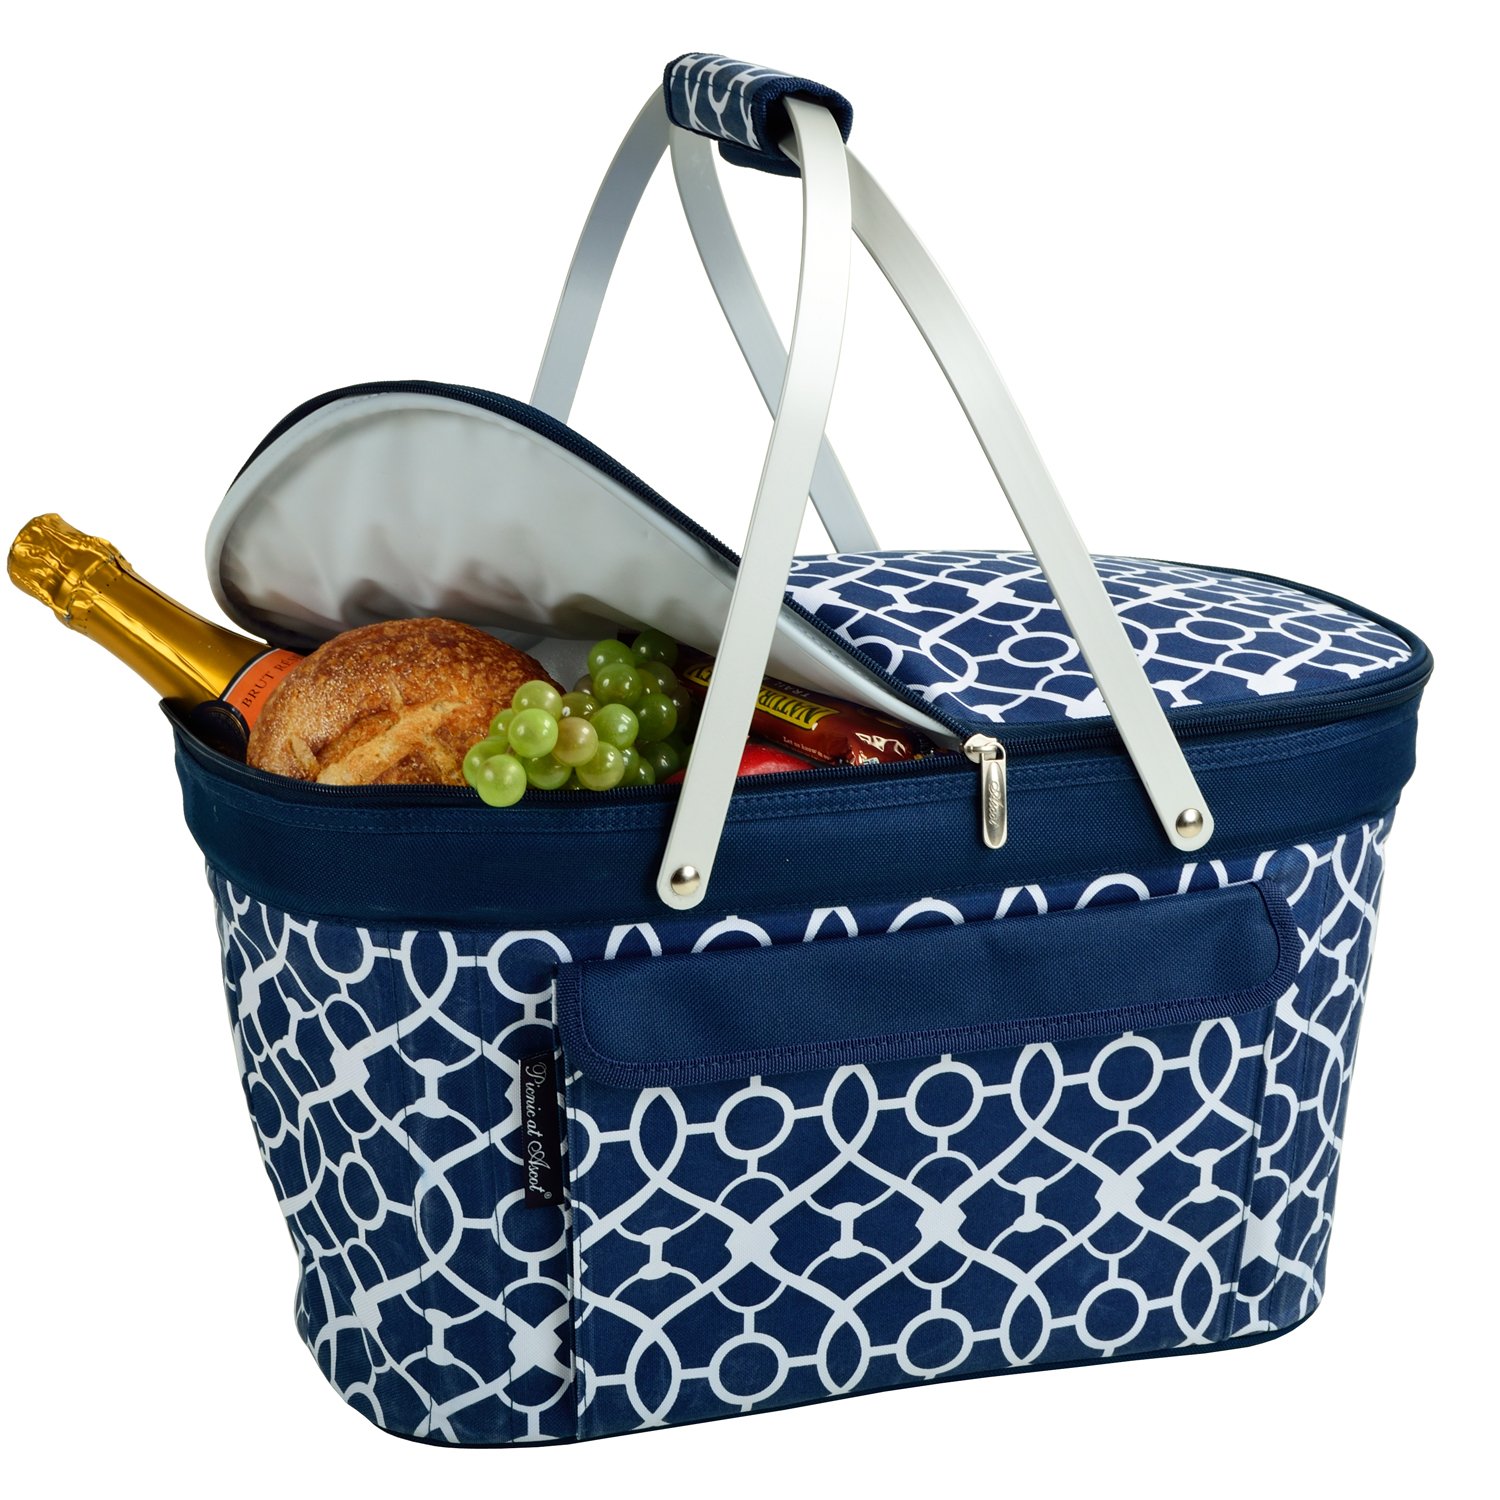 Picnic at Ascot Patented Insulated Folding Picnic Basket cooler- Designed & Quality Approved in the USA